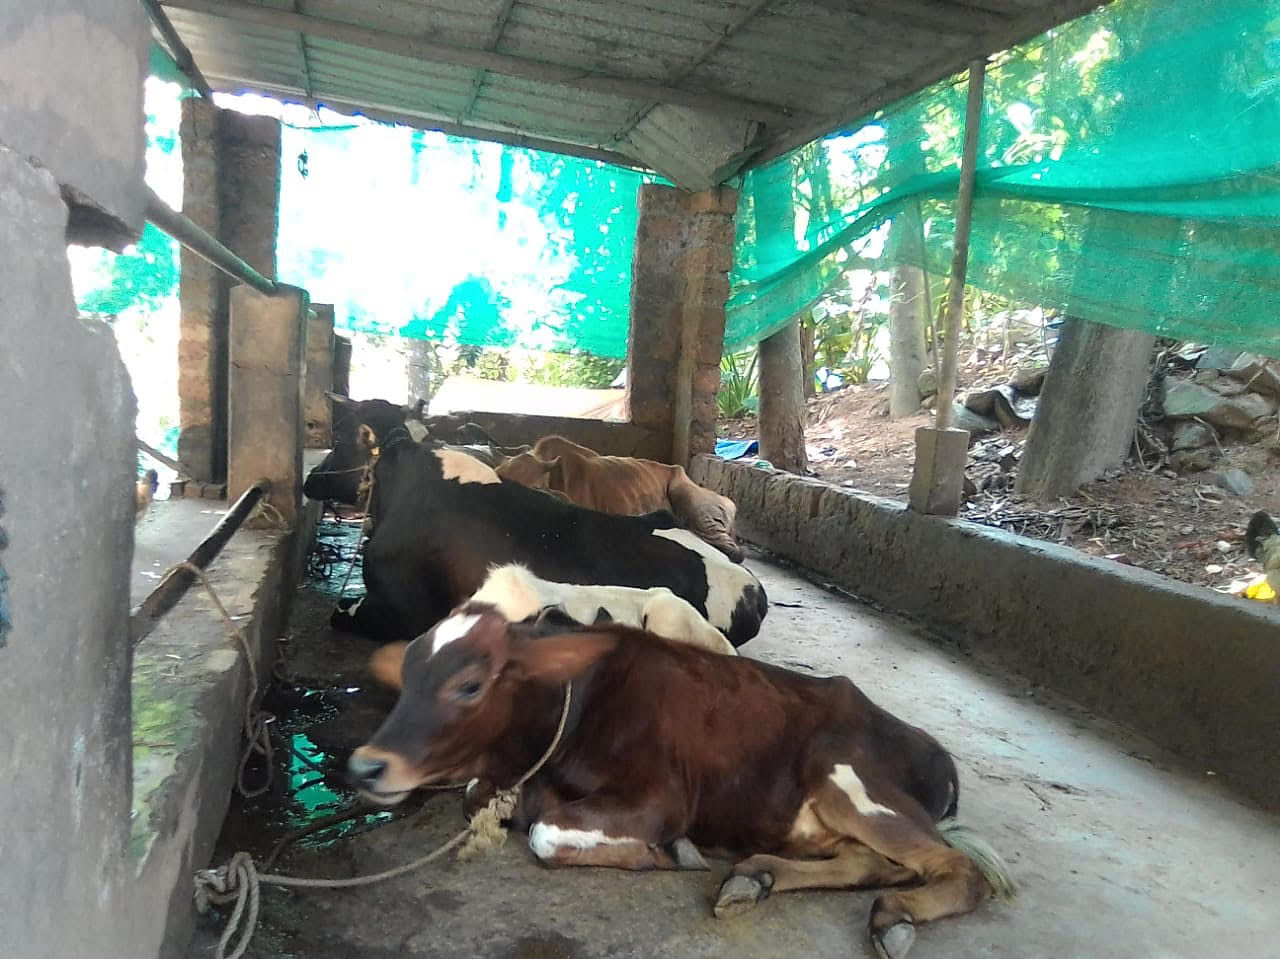 With four cows and many goats, Sreya could meet her expenses with out much difficulty